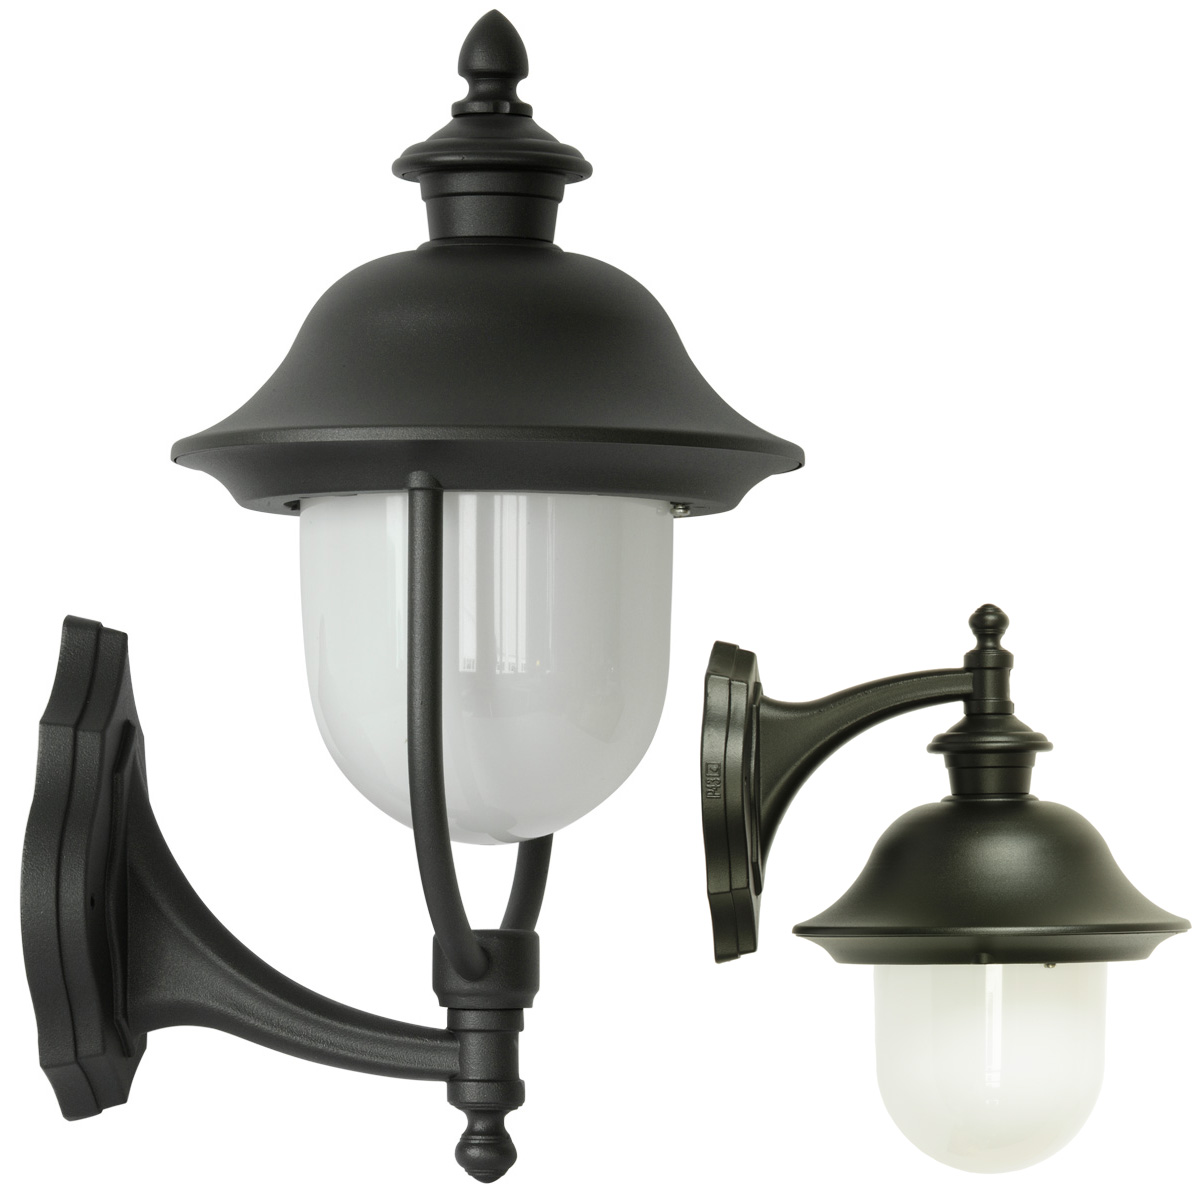 Wall Light for Outdoor Use with Historical Rounded Lantern